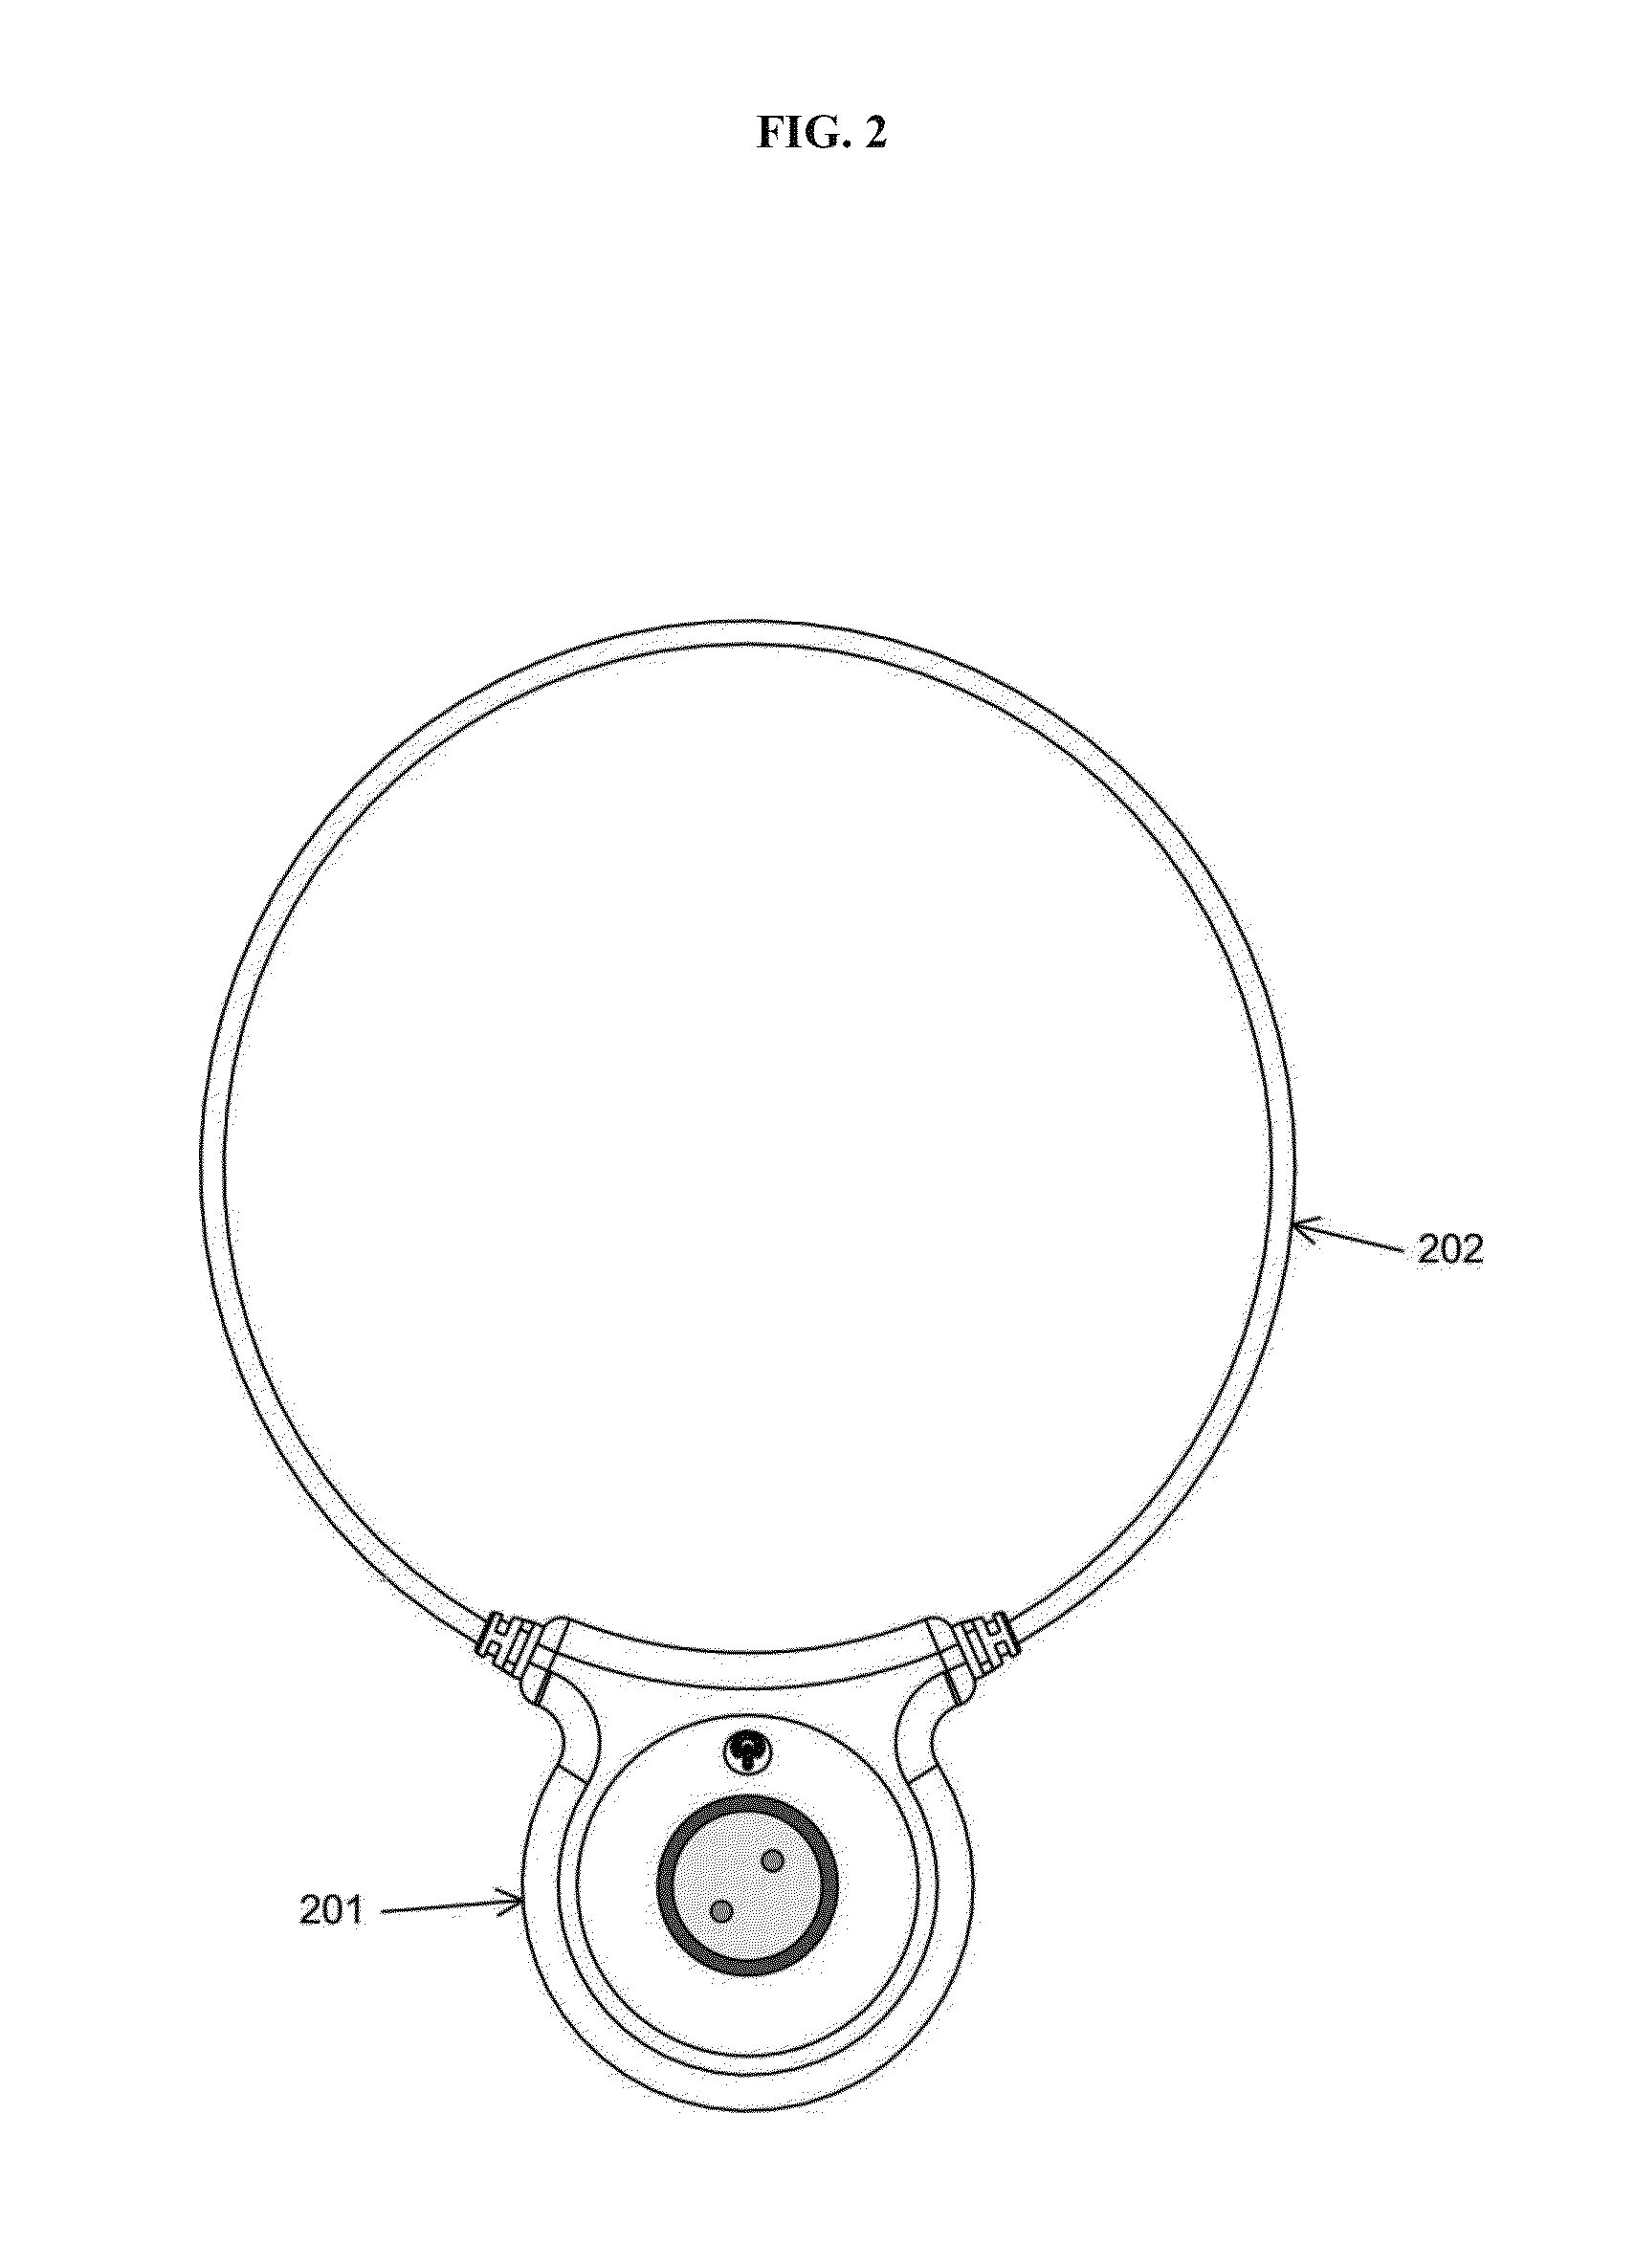 Devices and method for treatment of degenerative joint diseases with electromagnetic fields